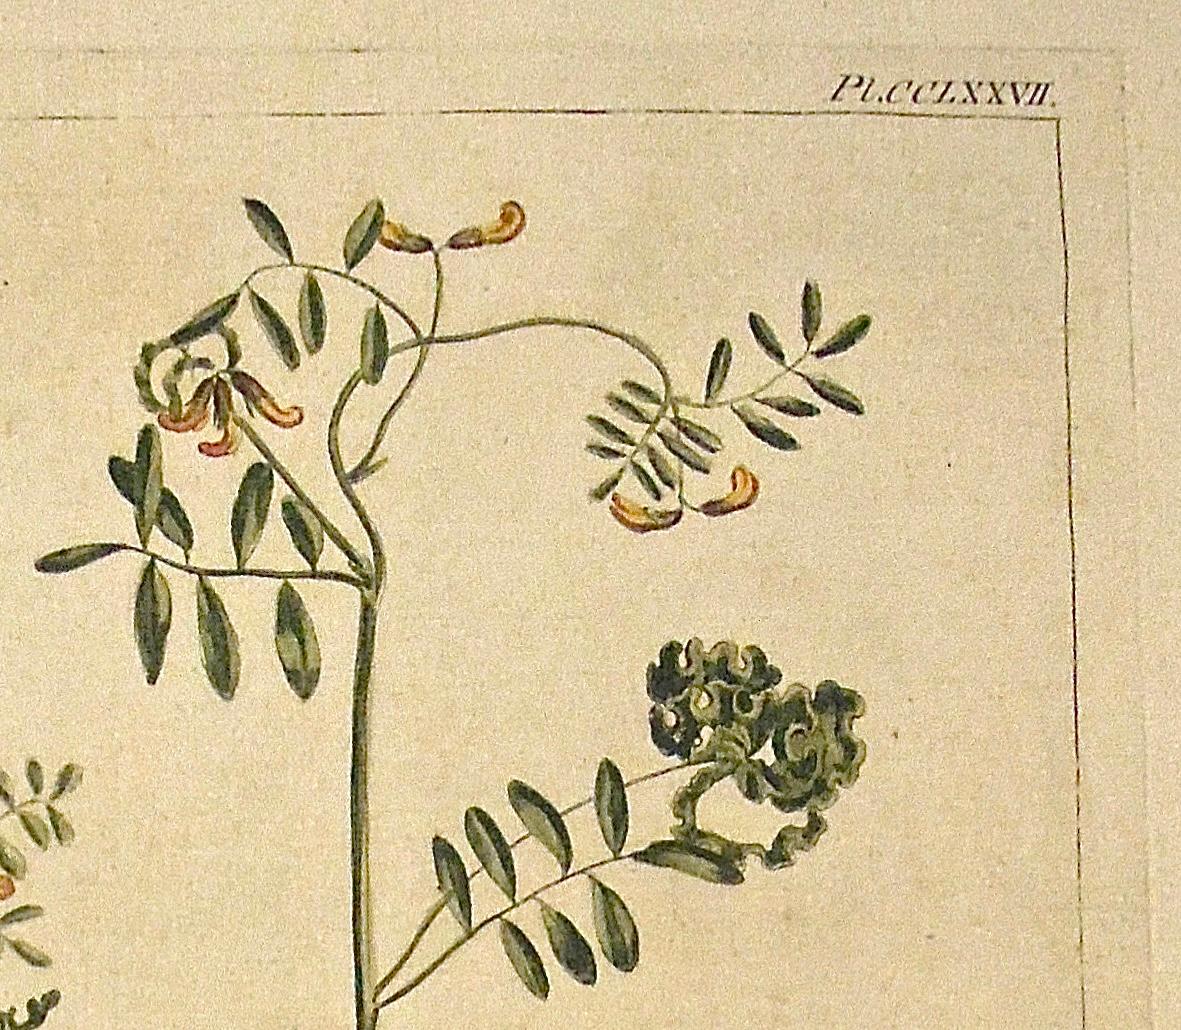 Hippocrepis.
Upper Right: Pl. CCLXXVII. Lower Left: R. Lancake delin. Lower Center: Publish'd according to Act of Parliament by P. Miller January 26, 1759. Lower Right: I. Miller sculp.
Author: Philip Miller
Source / Publication: The Gardener's